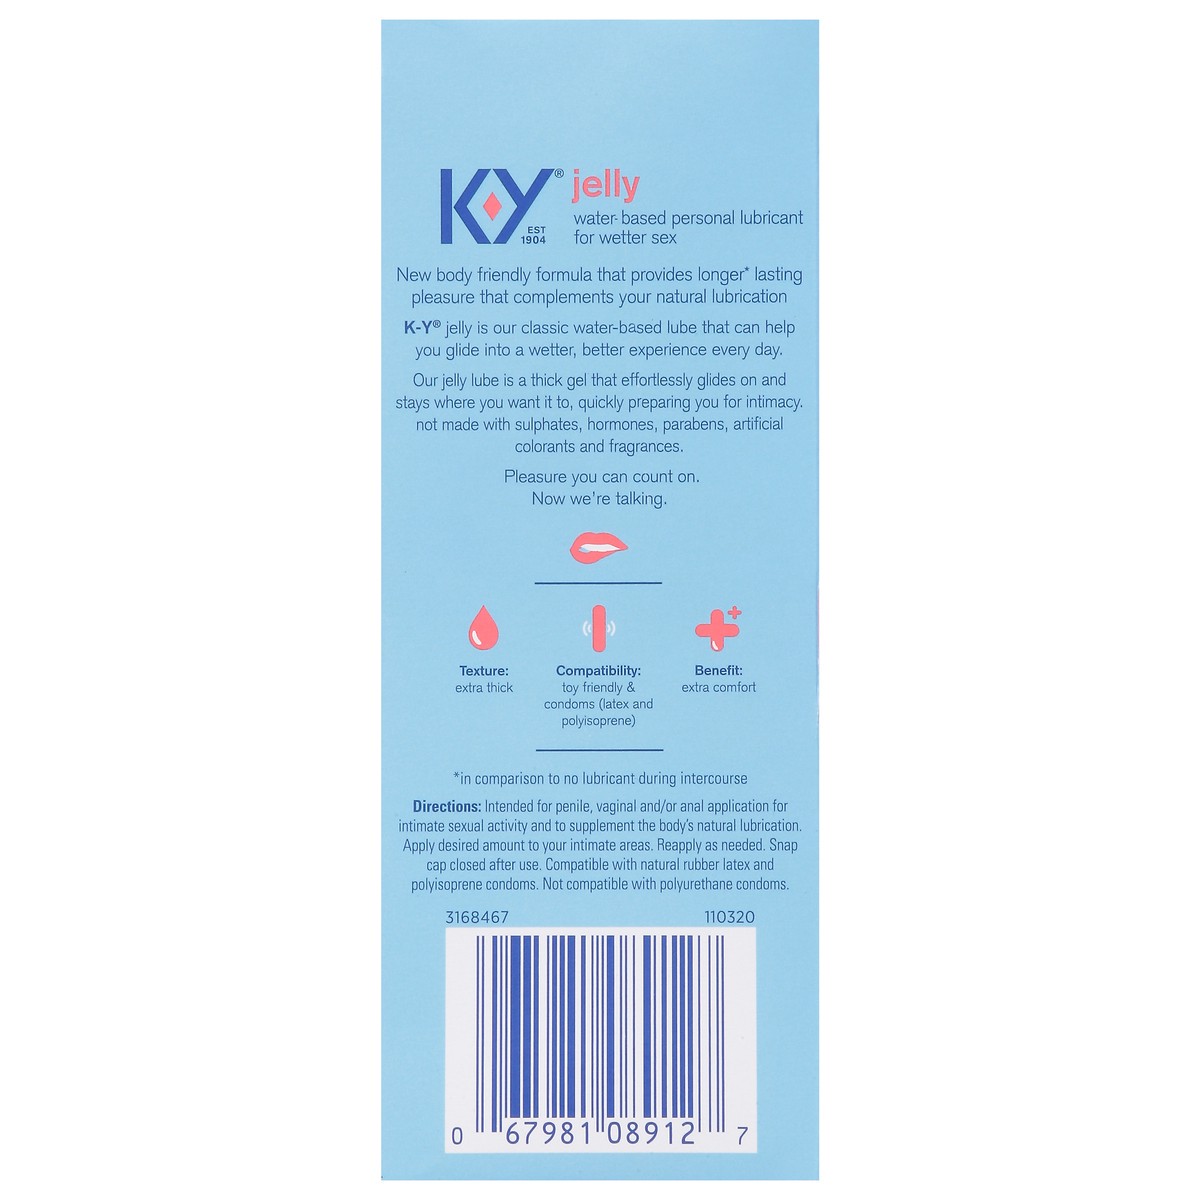 slide 7 of 13, K-Y Jelly Personal Lubricant, Body-Friendly Water-Based Formula, Safe for Anal Sex, Safe to Use with Latex Condoms. Glide into a Wetter, Better Experience Every Day. For Men, Women, Couples, 4 FL OZ, 4 oz